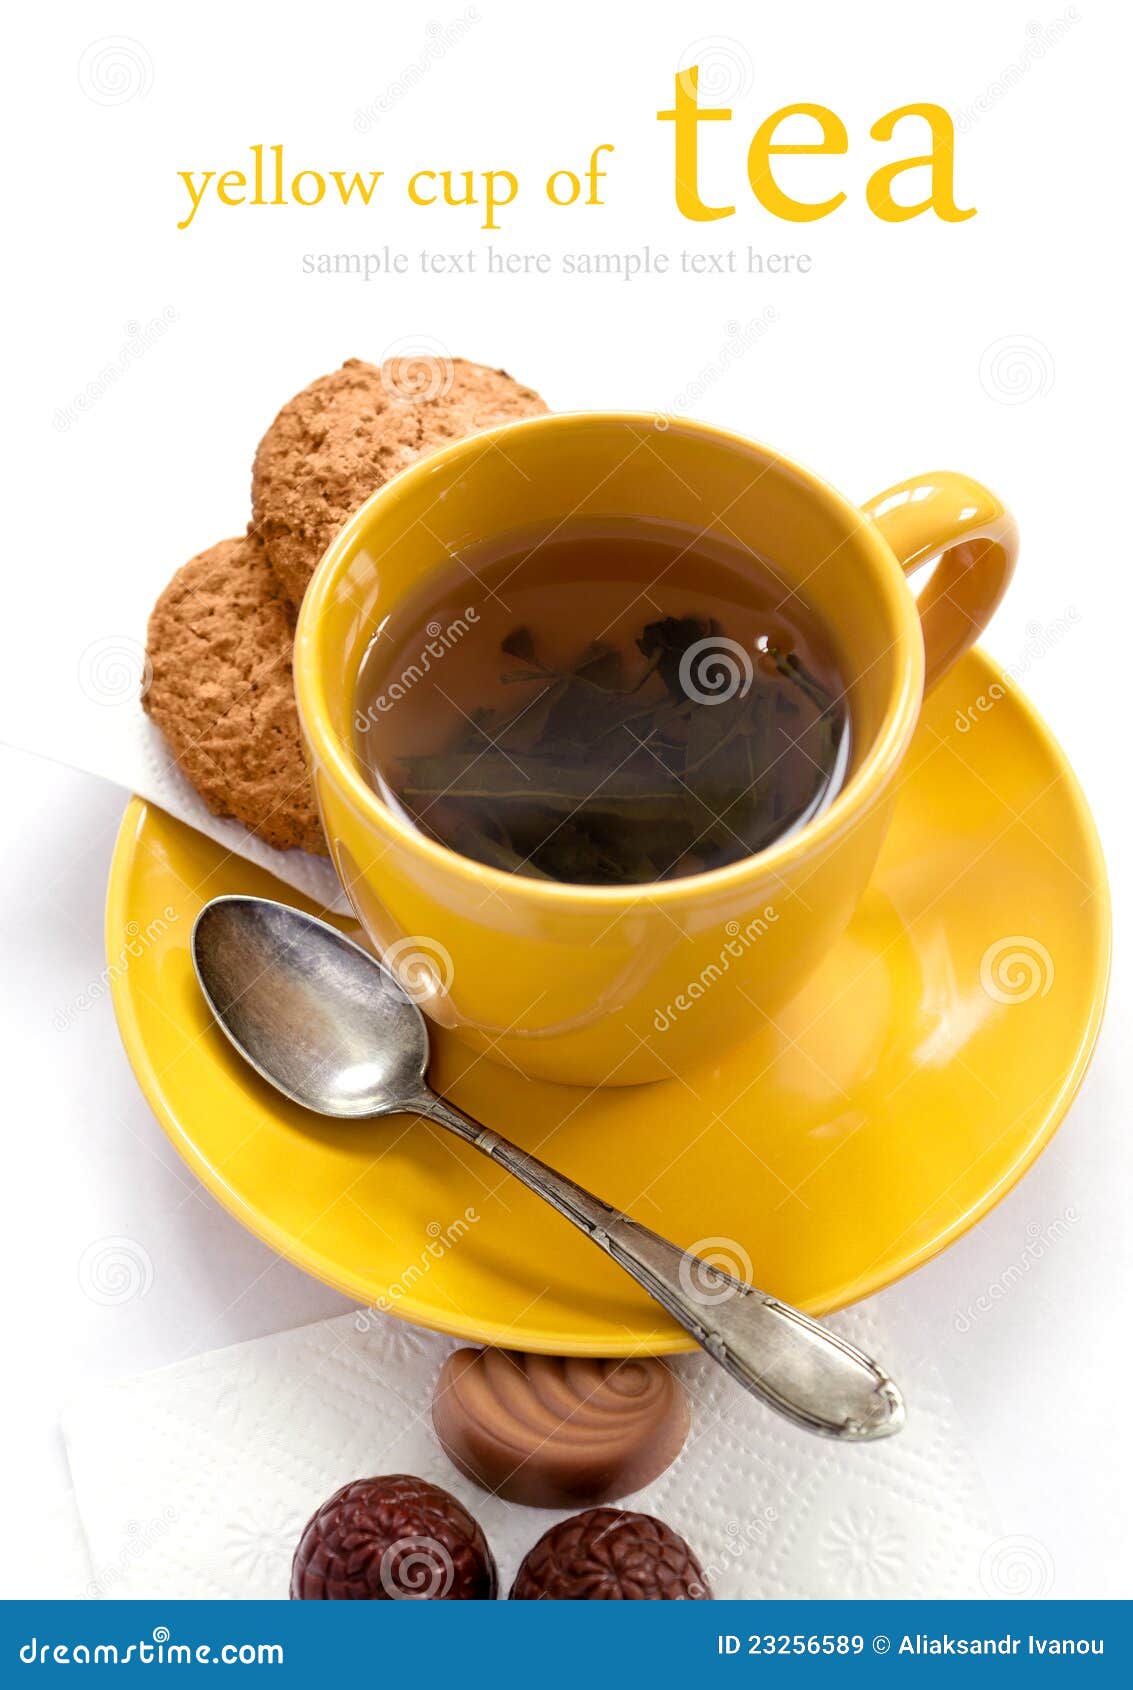 Yellow Cup Of Tea. Royalty Free Stock Images - Image: 23256589